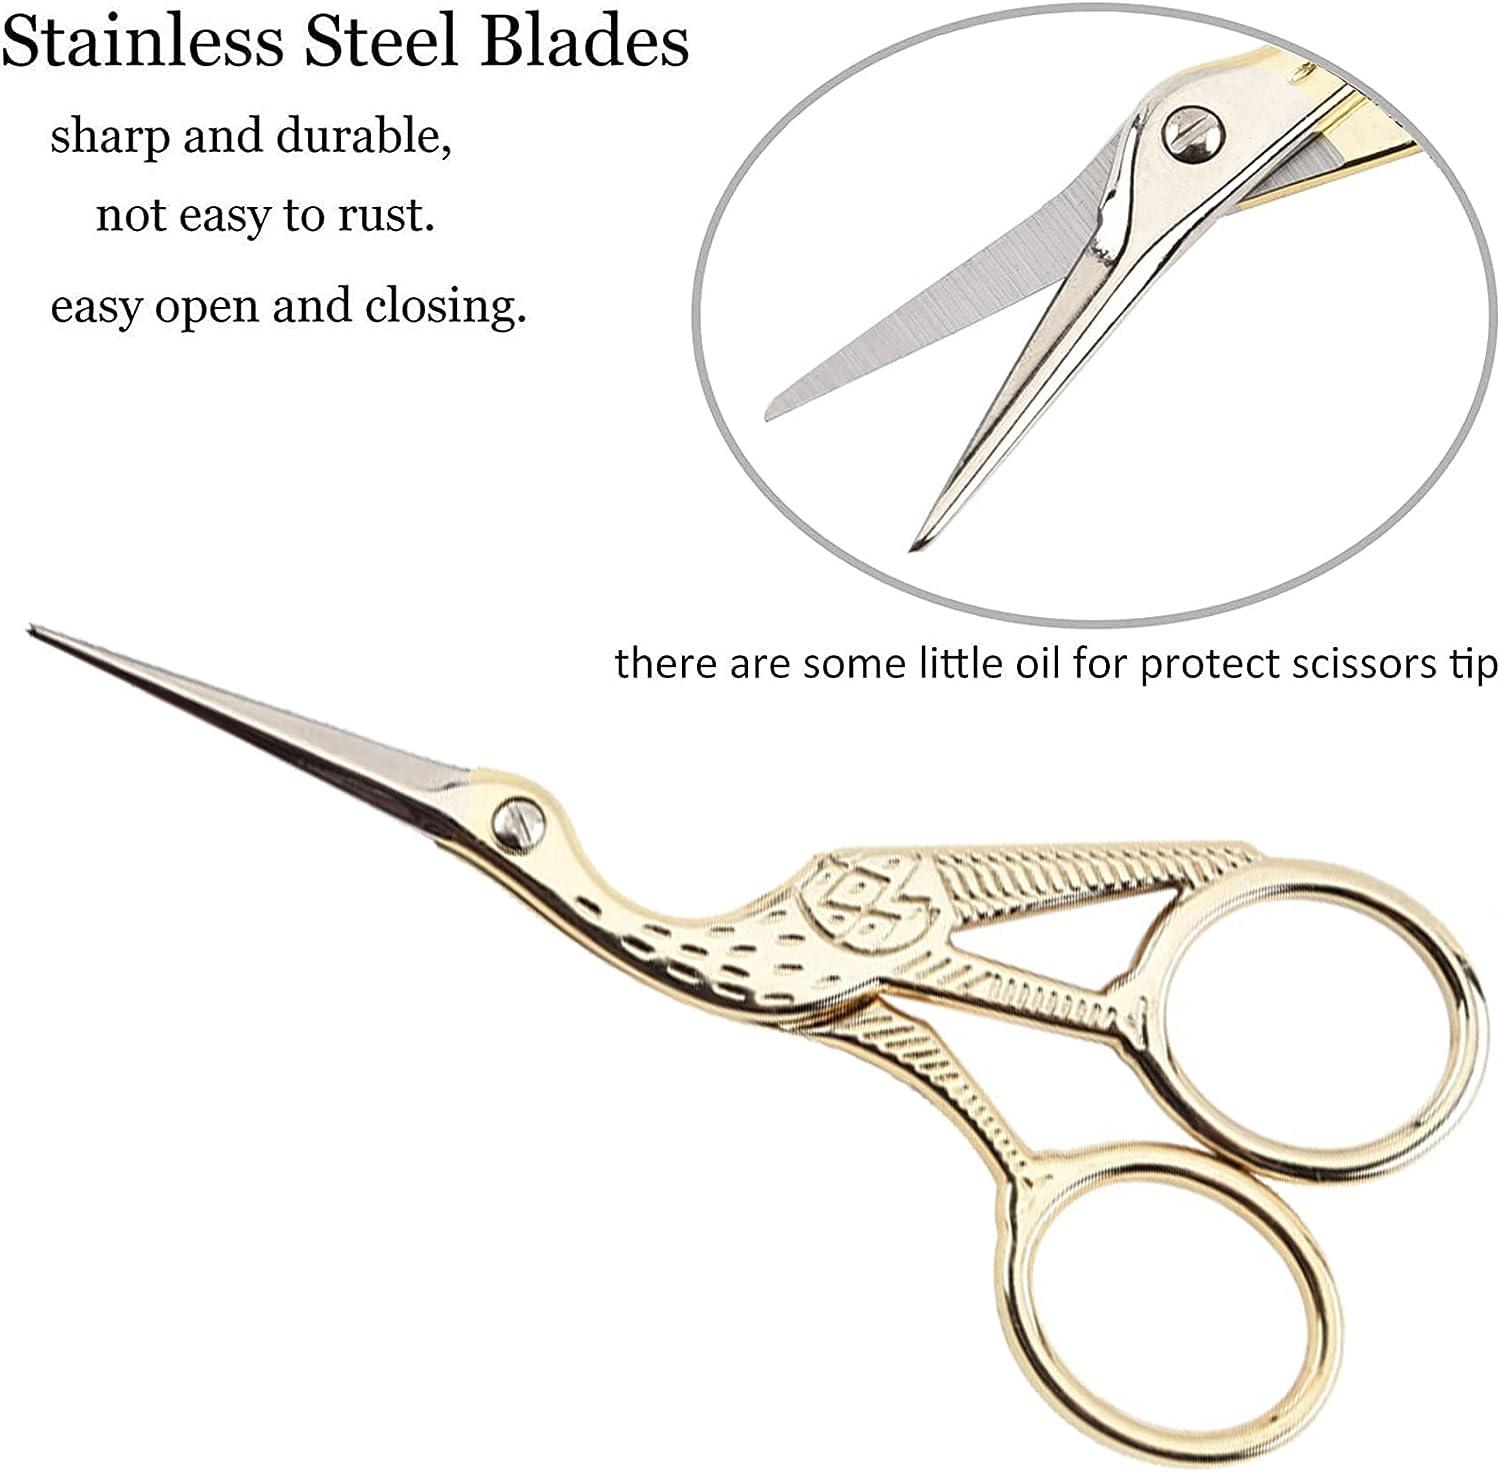 Embroidery Scissors Thread Snips, Sewing Scissors, Knitting Scissors, Small  Black Scissors 